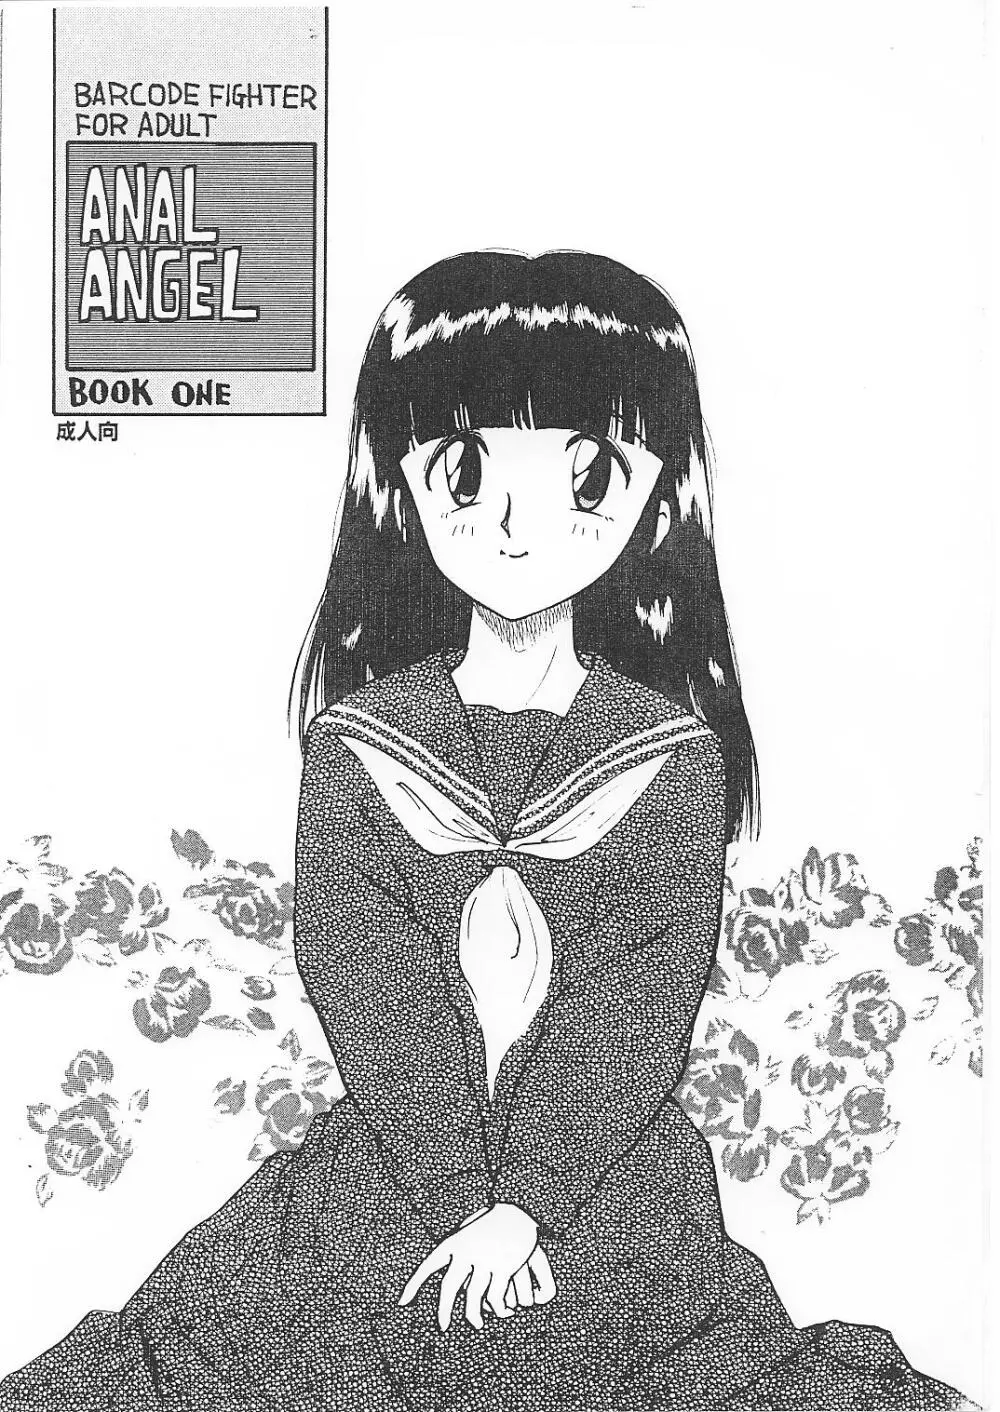 ANAL ANGEL - page1